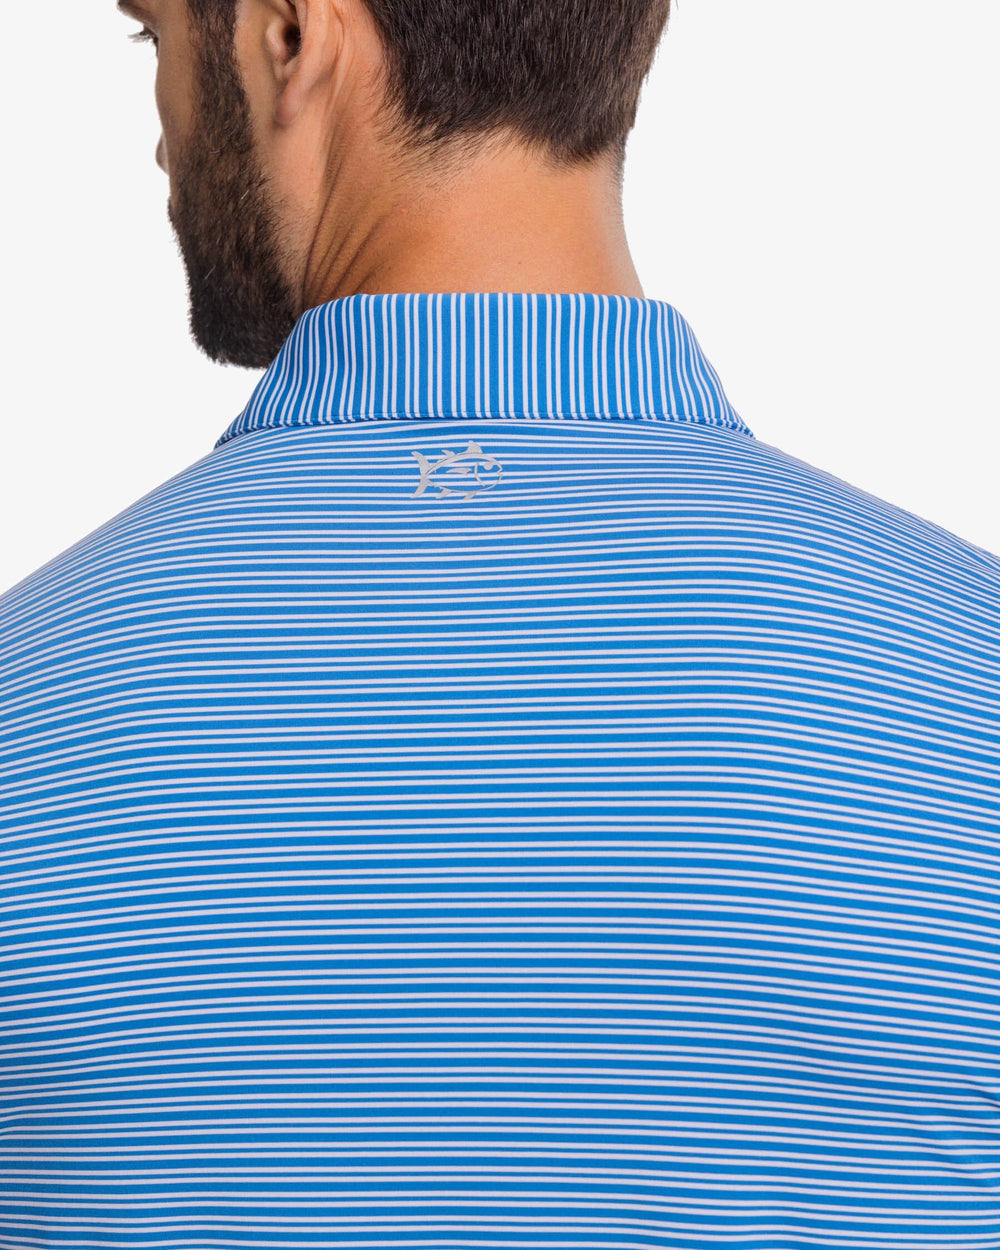 The detail view of the Southern Tide brrr-eeze Millwood Stripe Performance Polo Shirt by Southern Tide - Atlantic Blue